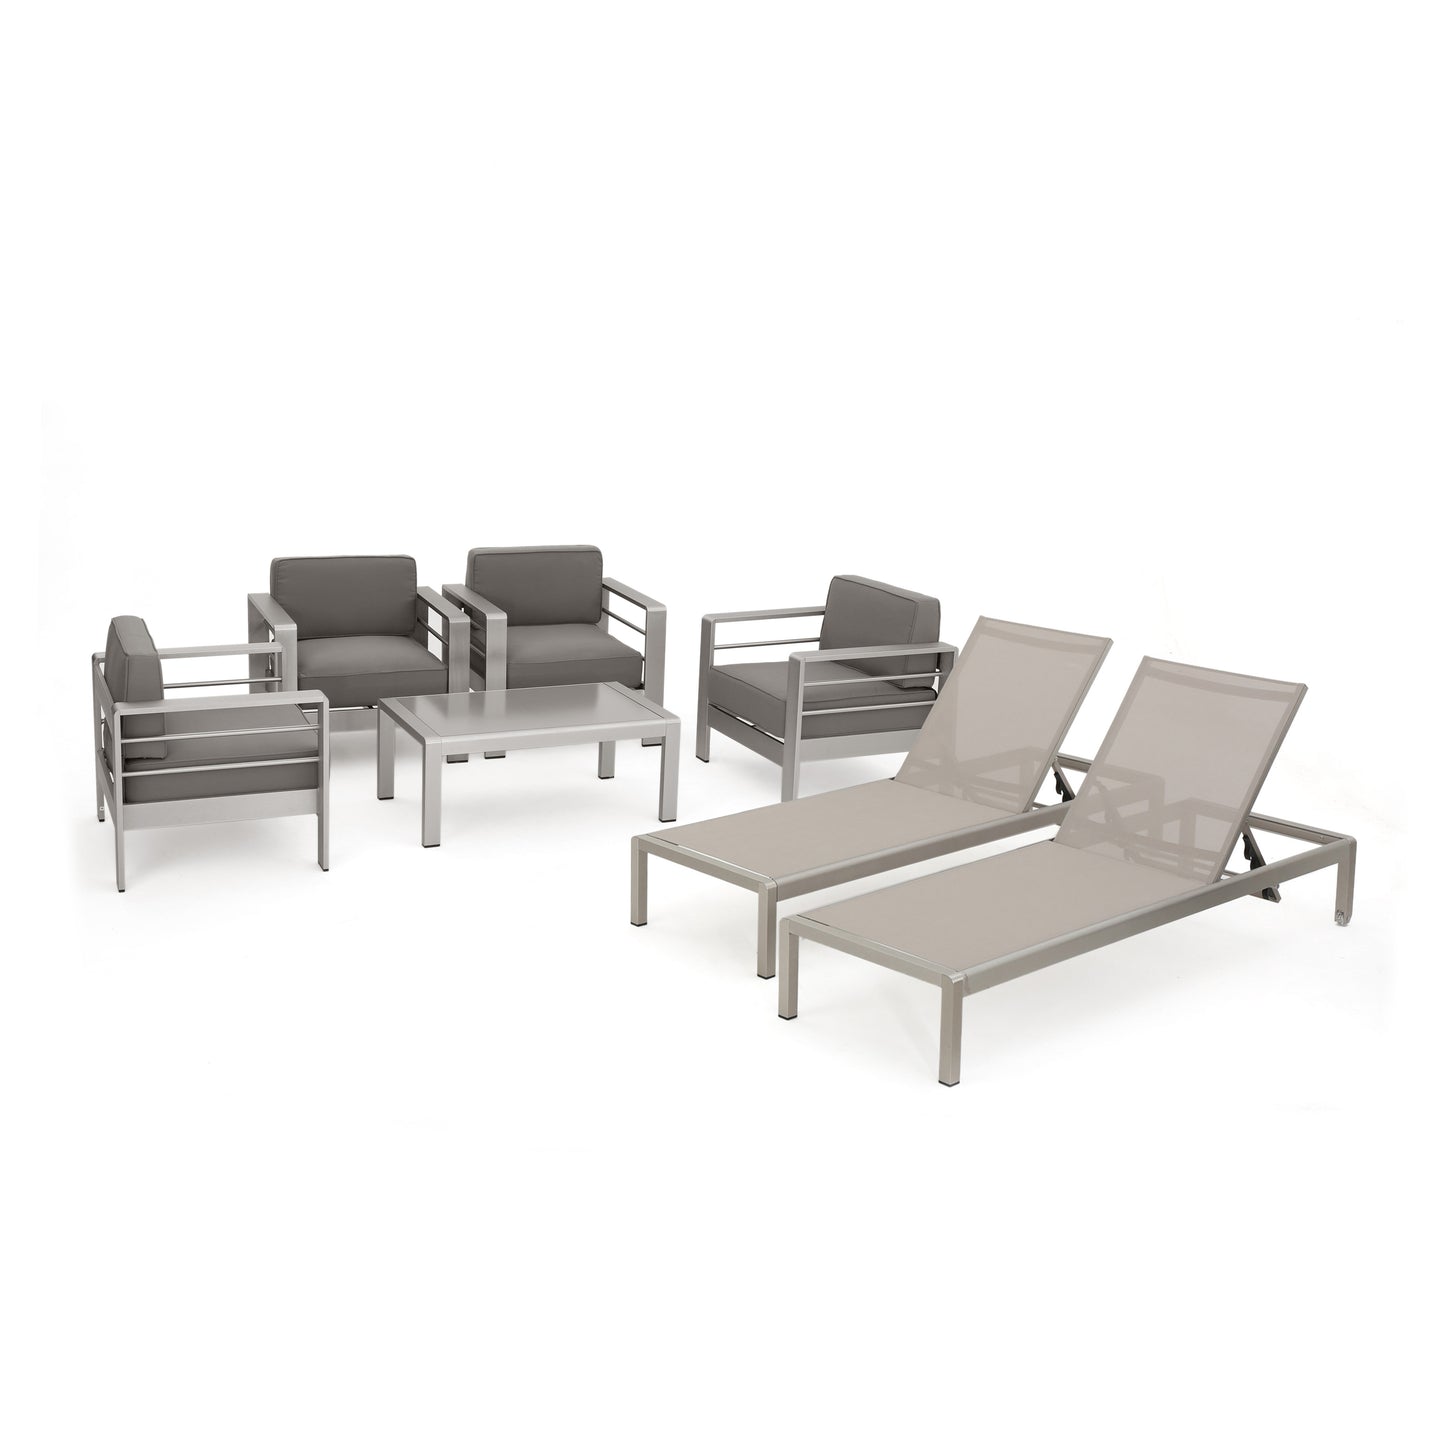 Coral Bay Outdoor 4 Pc Club Chair Set w/ 2 Chaise Lounges & Table